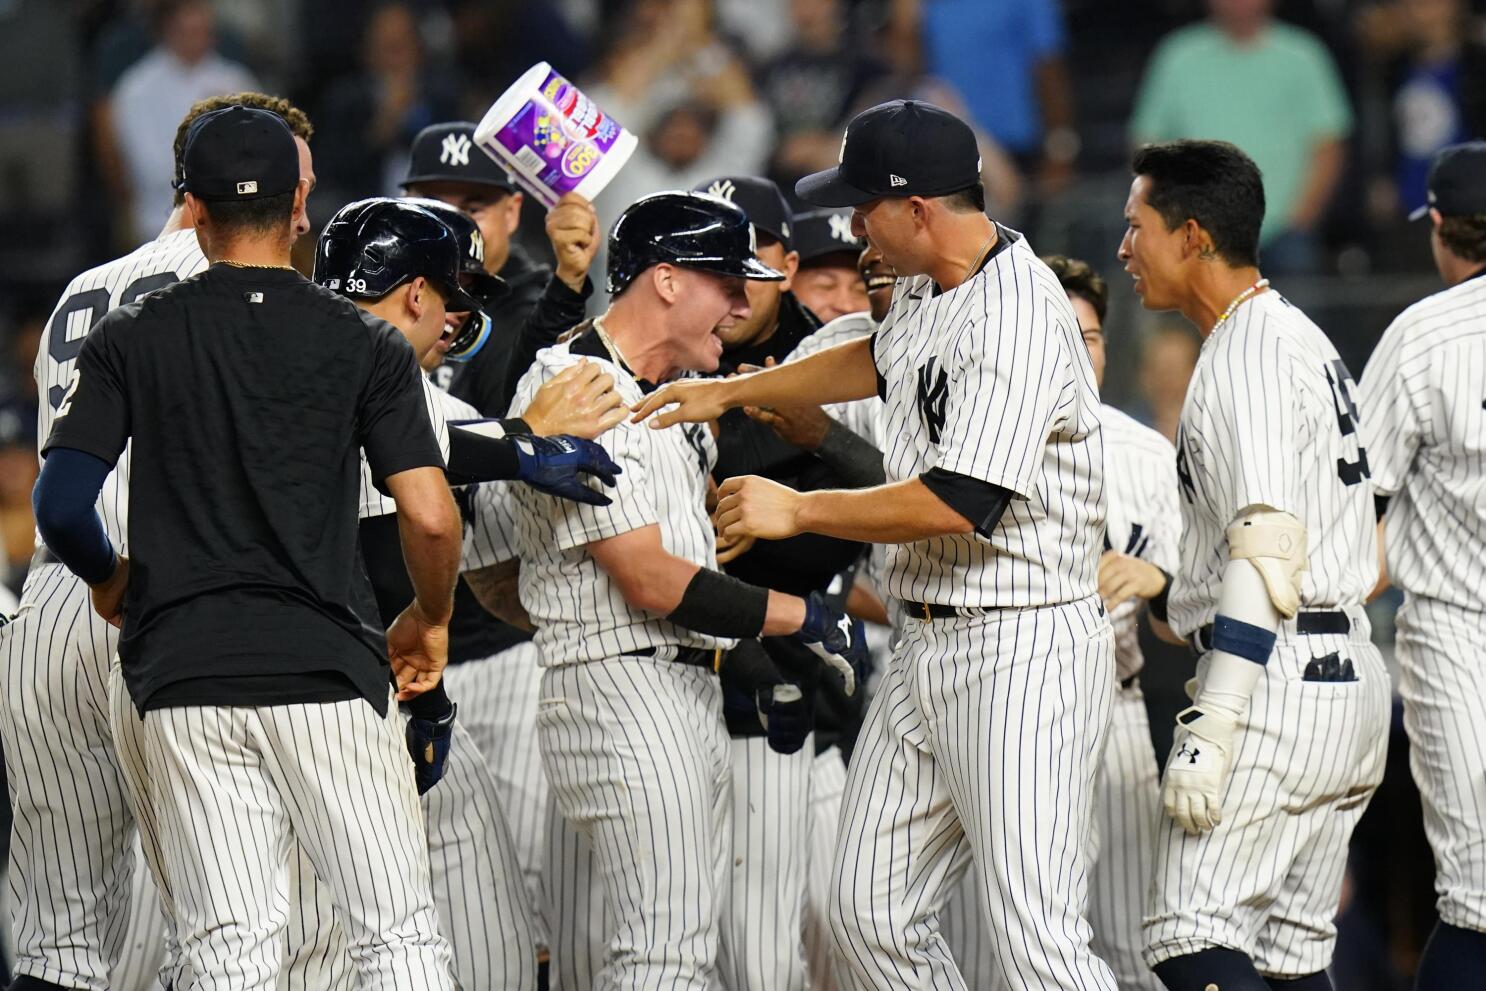 Giancarlo Stanton finally Yankees All-Star after frustrating start